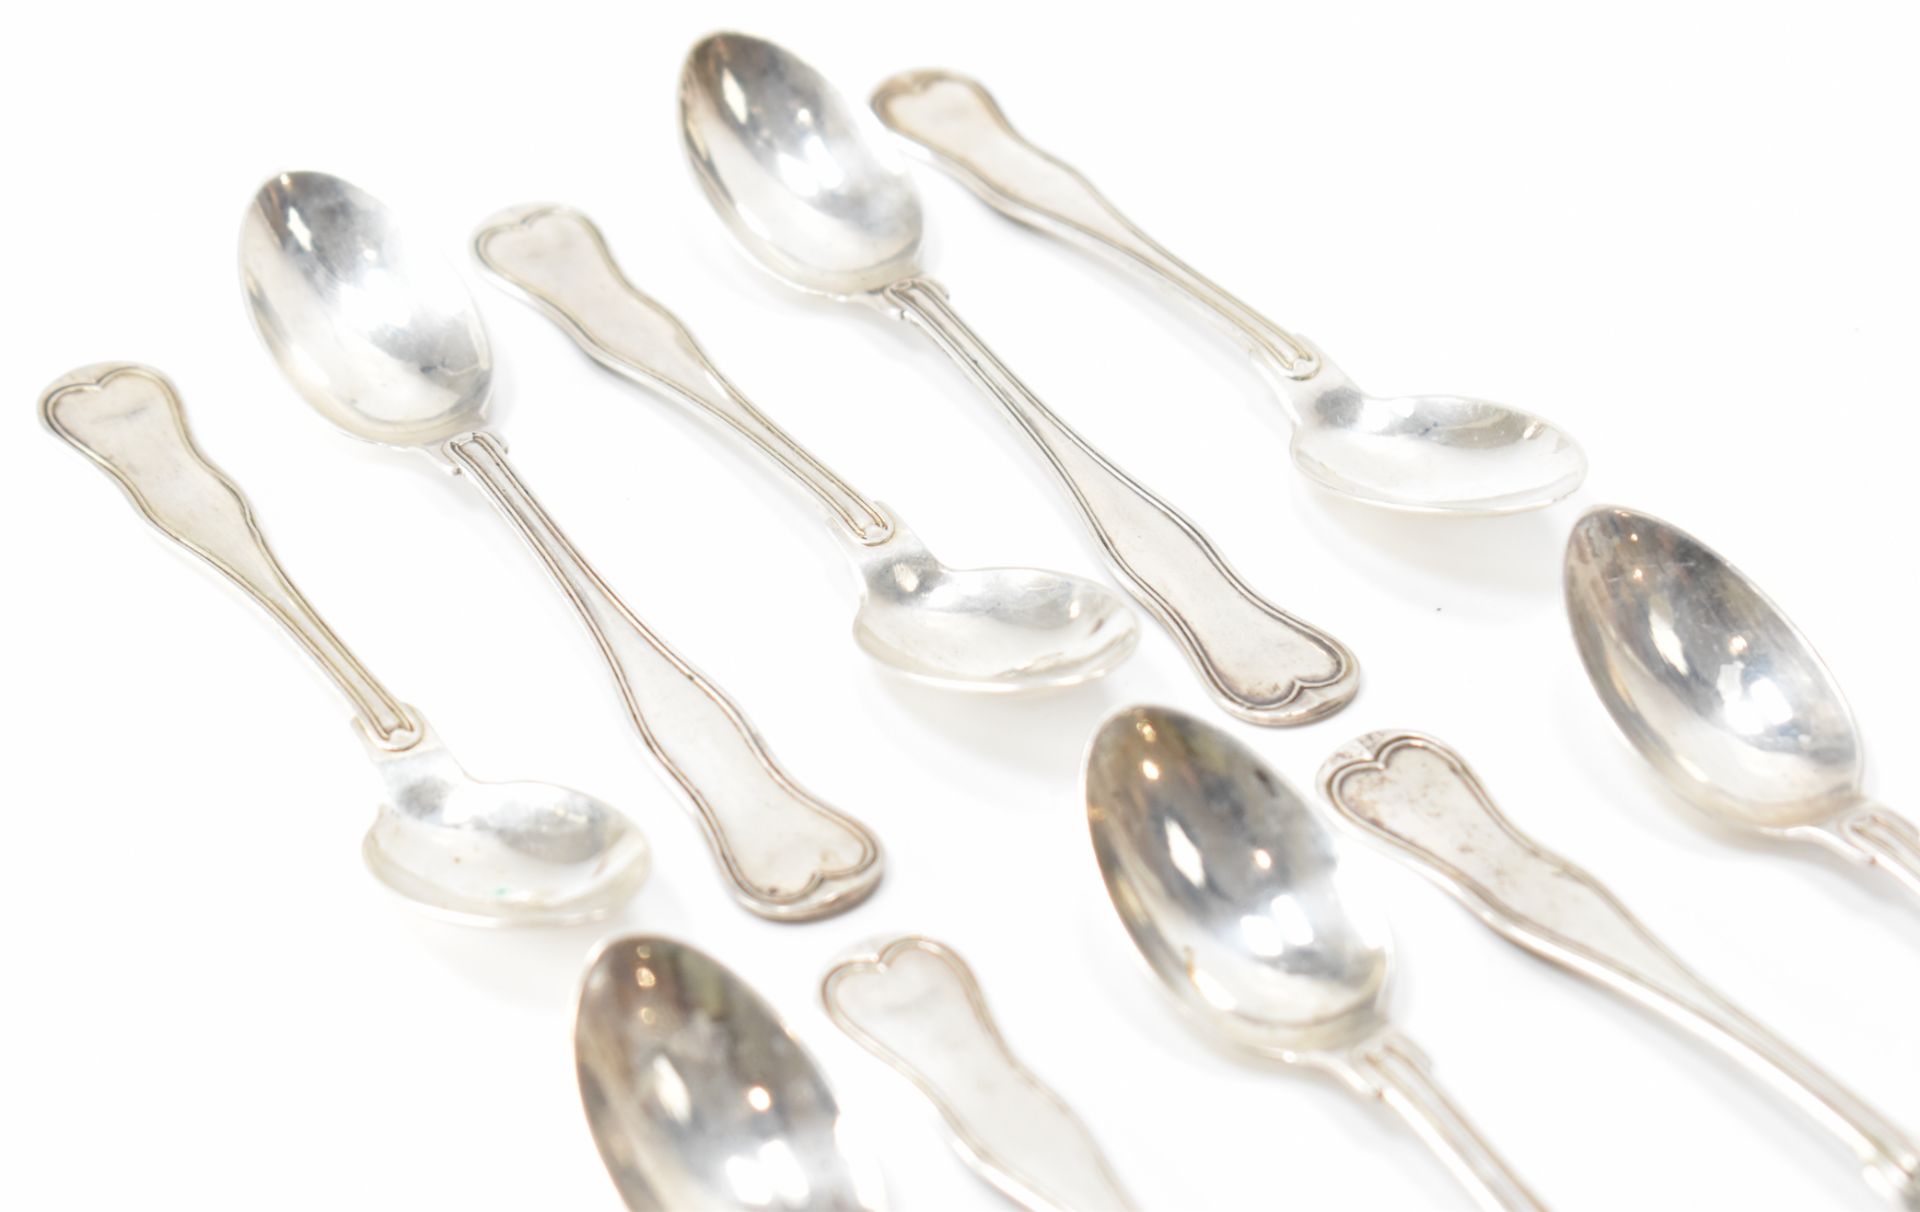 SET OF 10 ANTIQUE AUSTRO HUNGARIAN SILVER TEASPOONS - Image 2 of 6